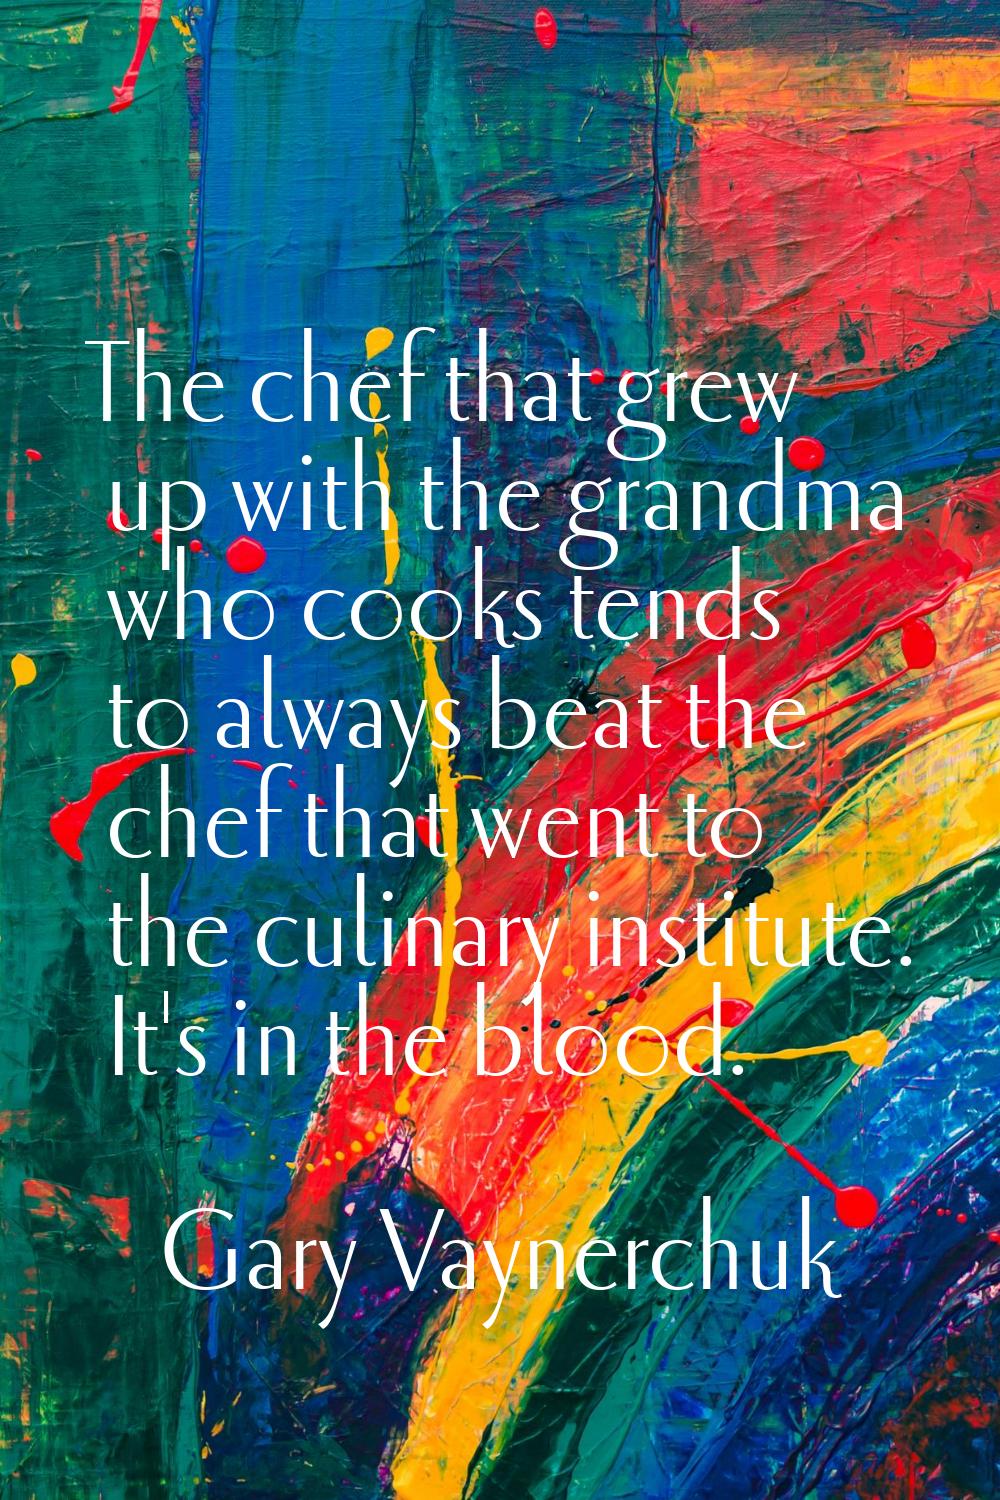 The chef that grew up with the grandma who cooks tends to always beat the chef that went to the cul